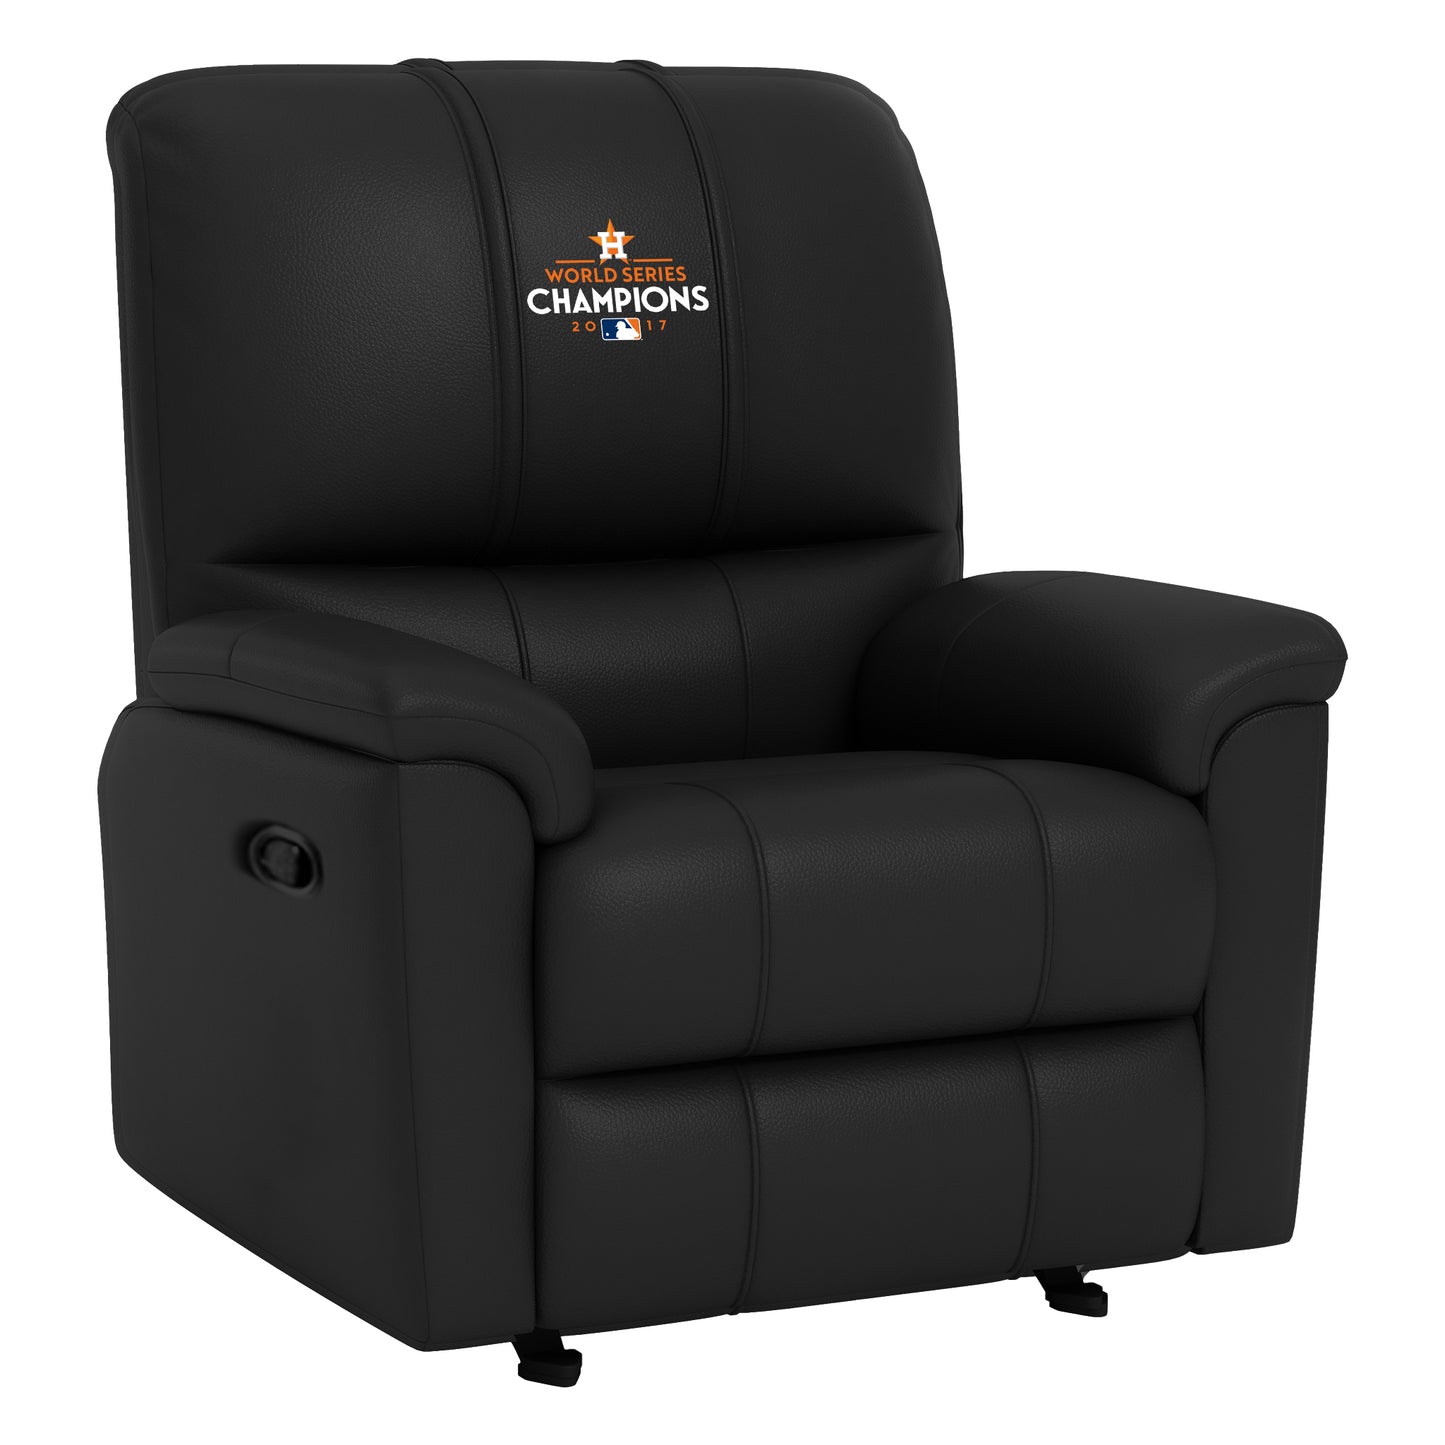 Rocker Recliner with Houston Astros 2017 Champions